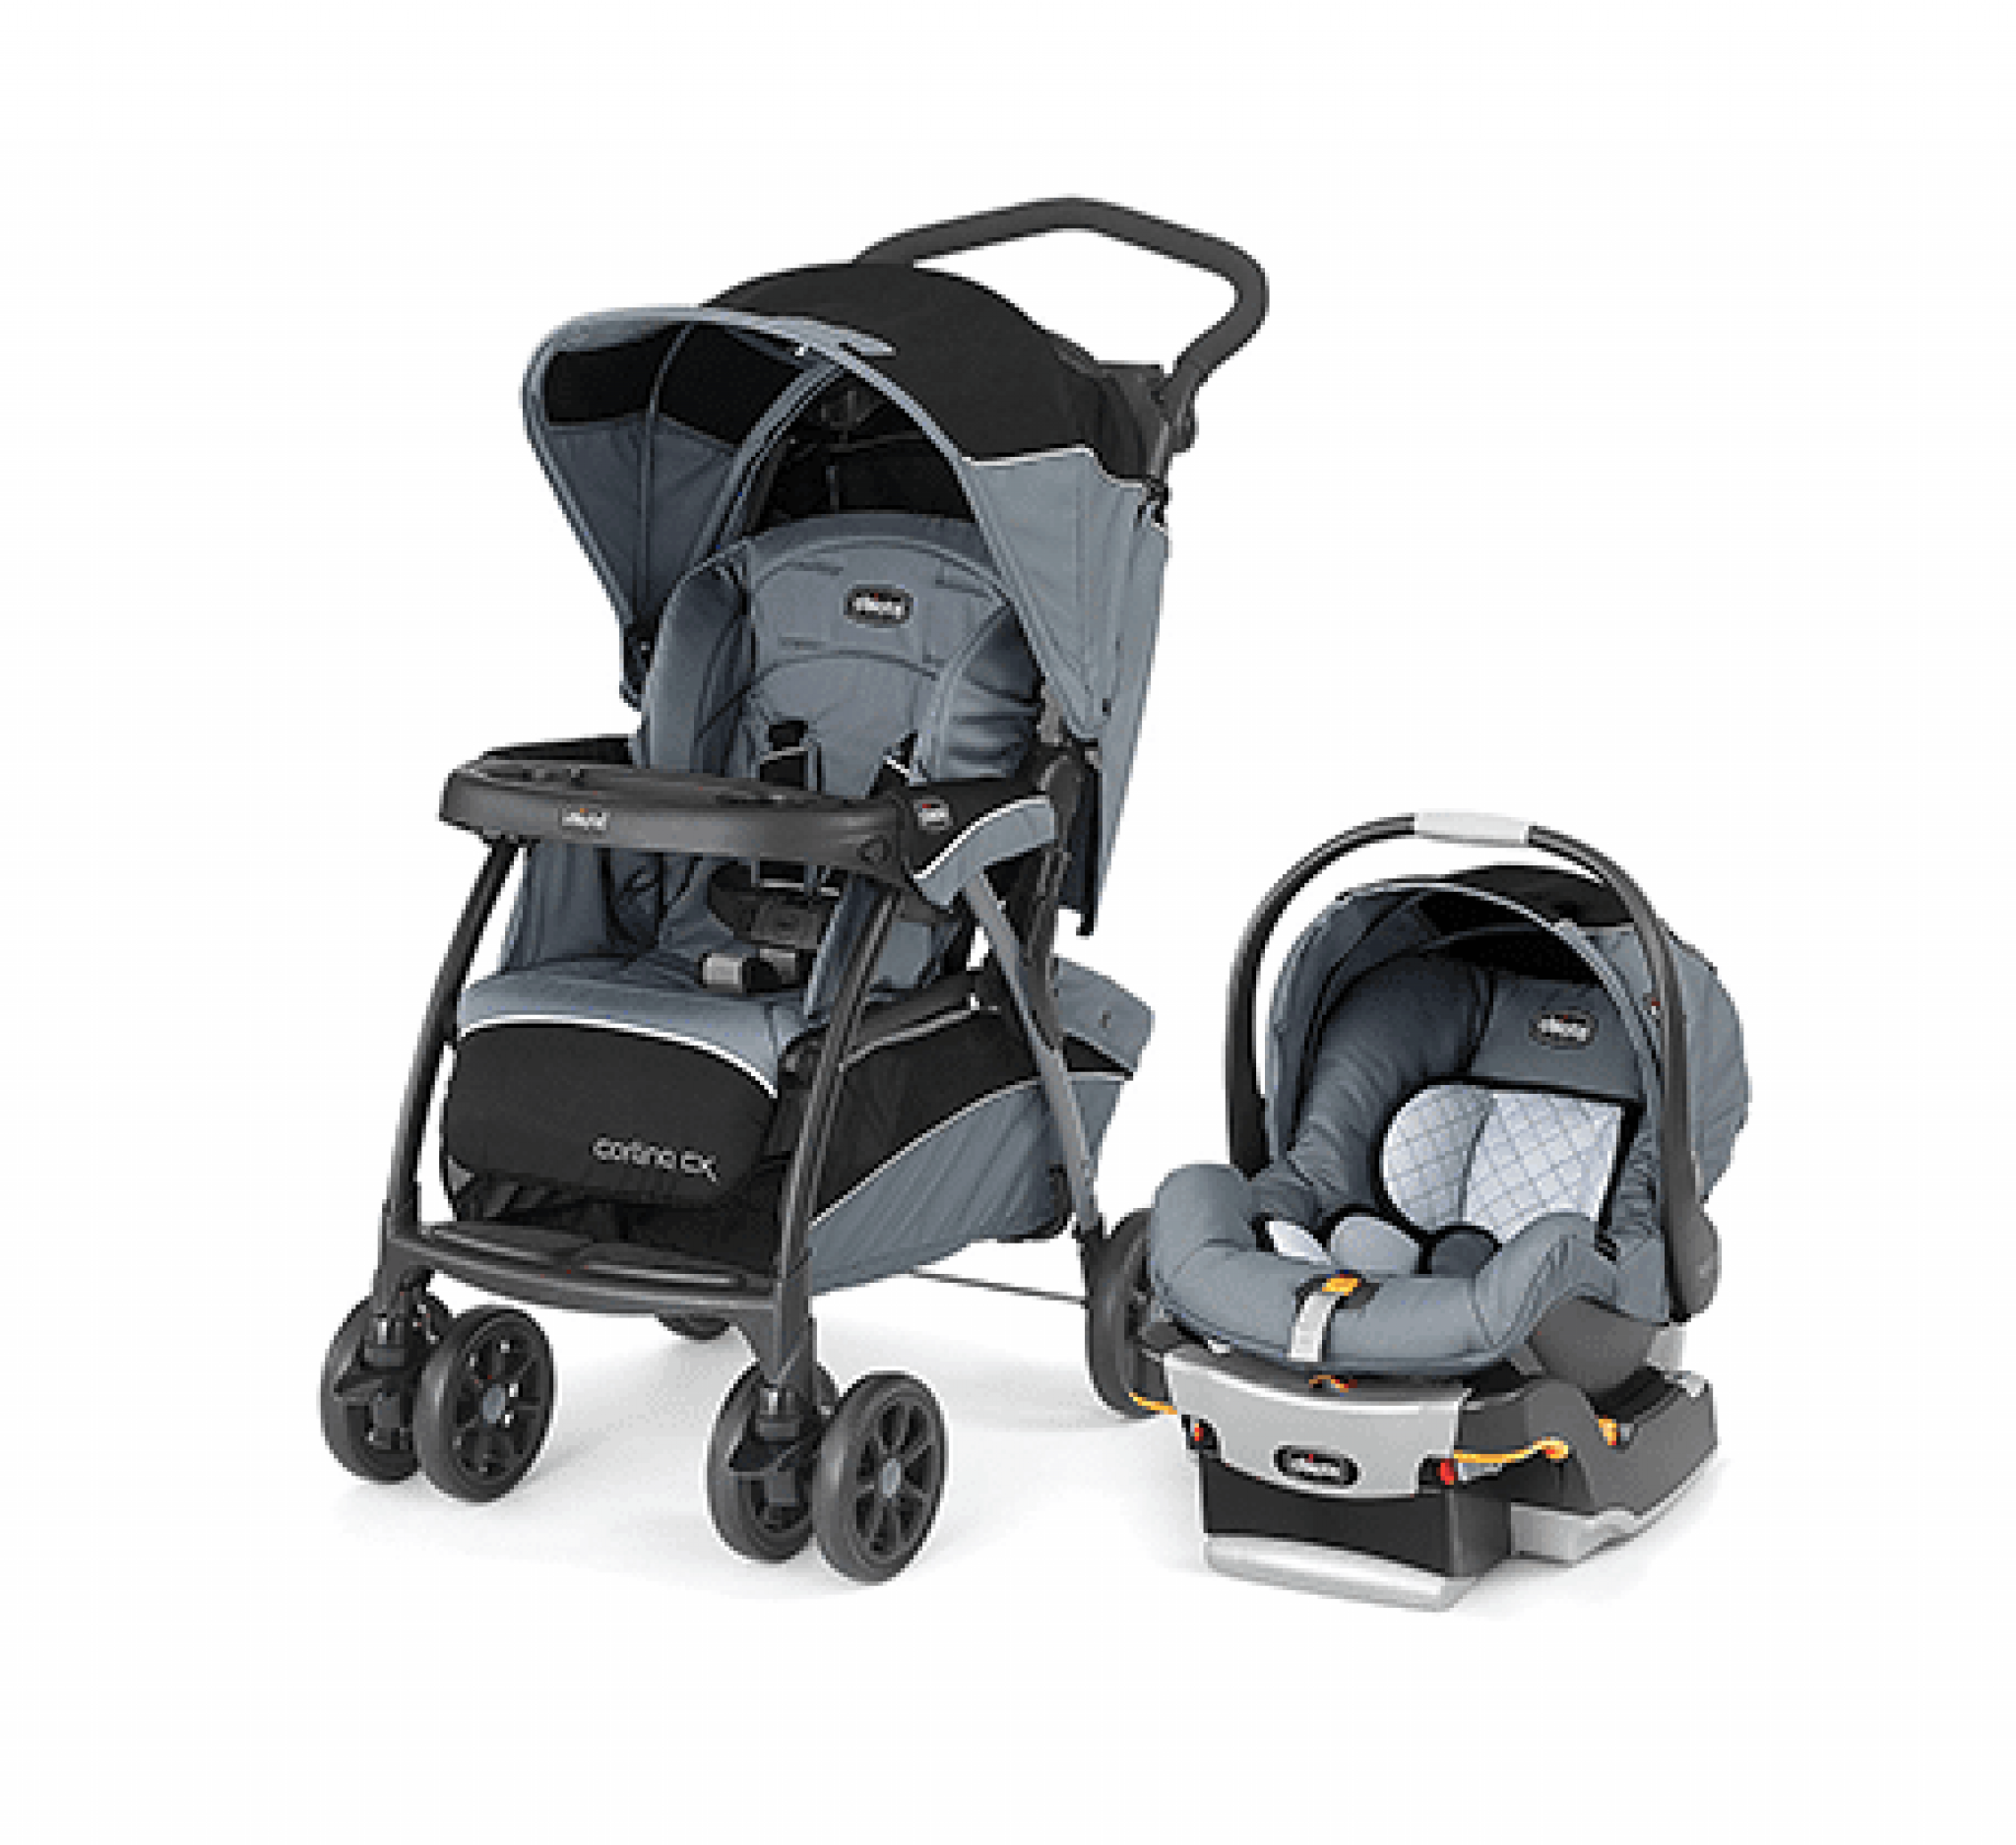 Chicco Cortina Cx Review - My Traveling Baby